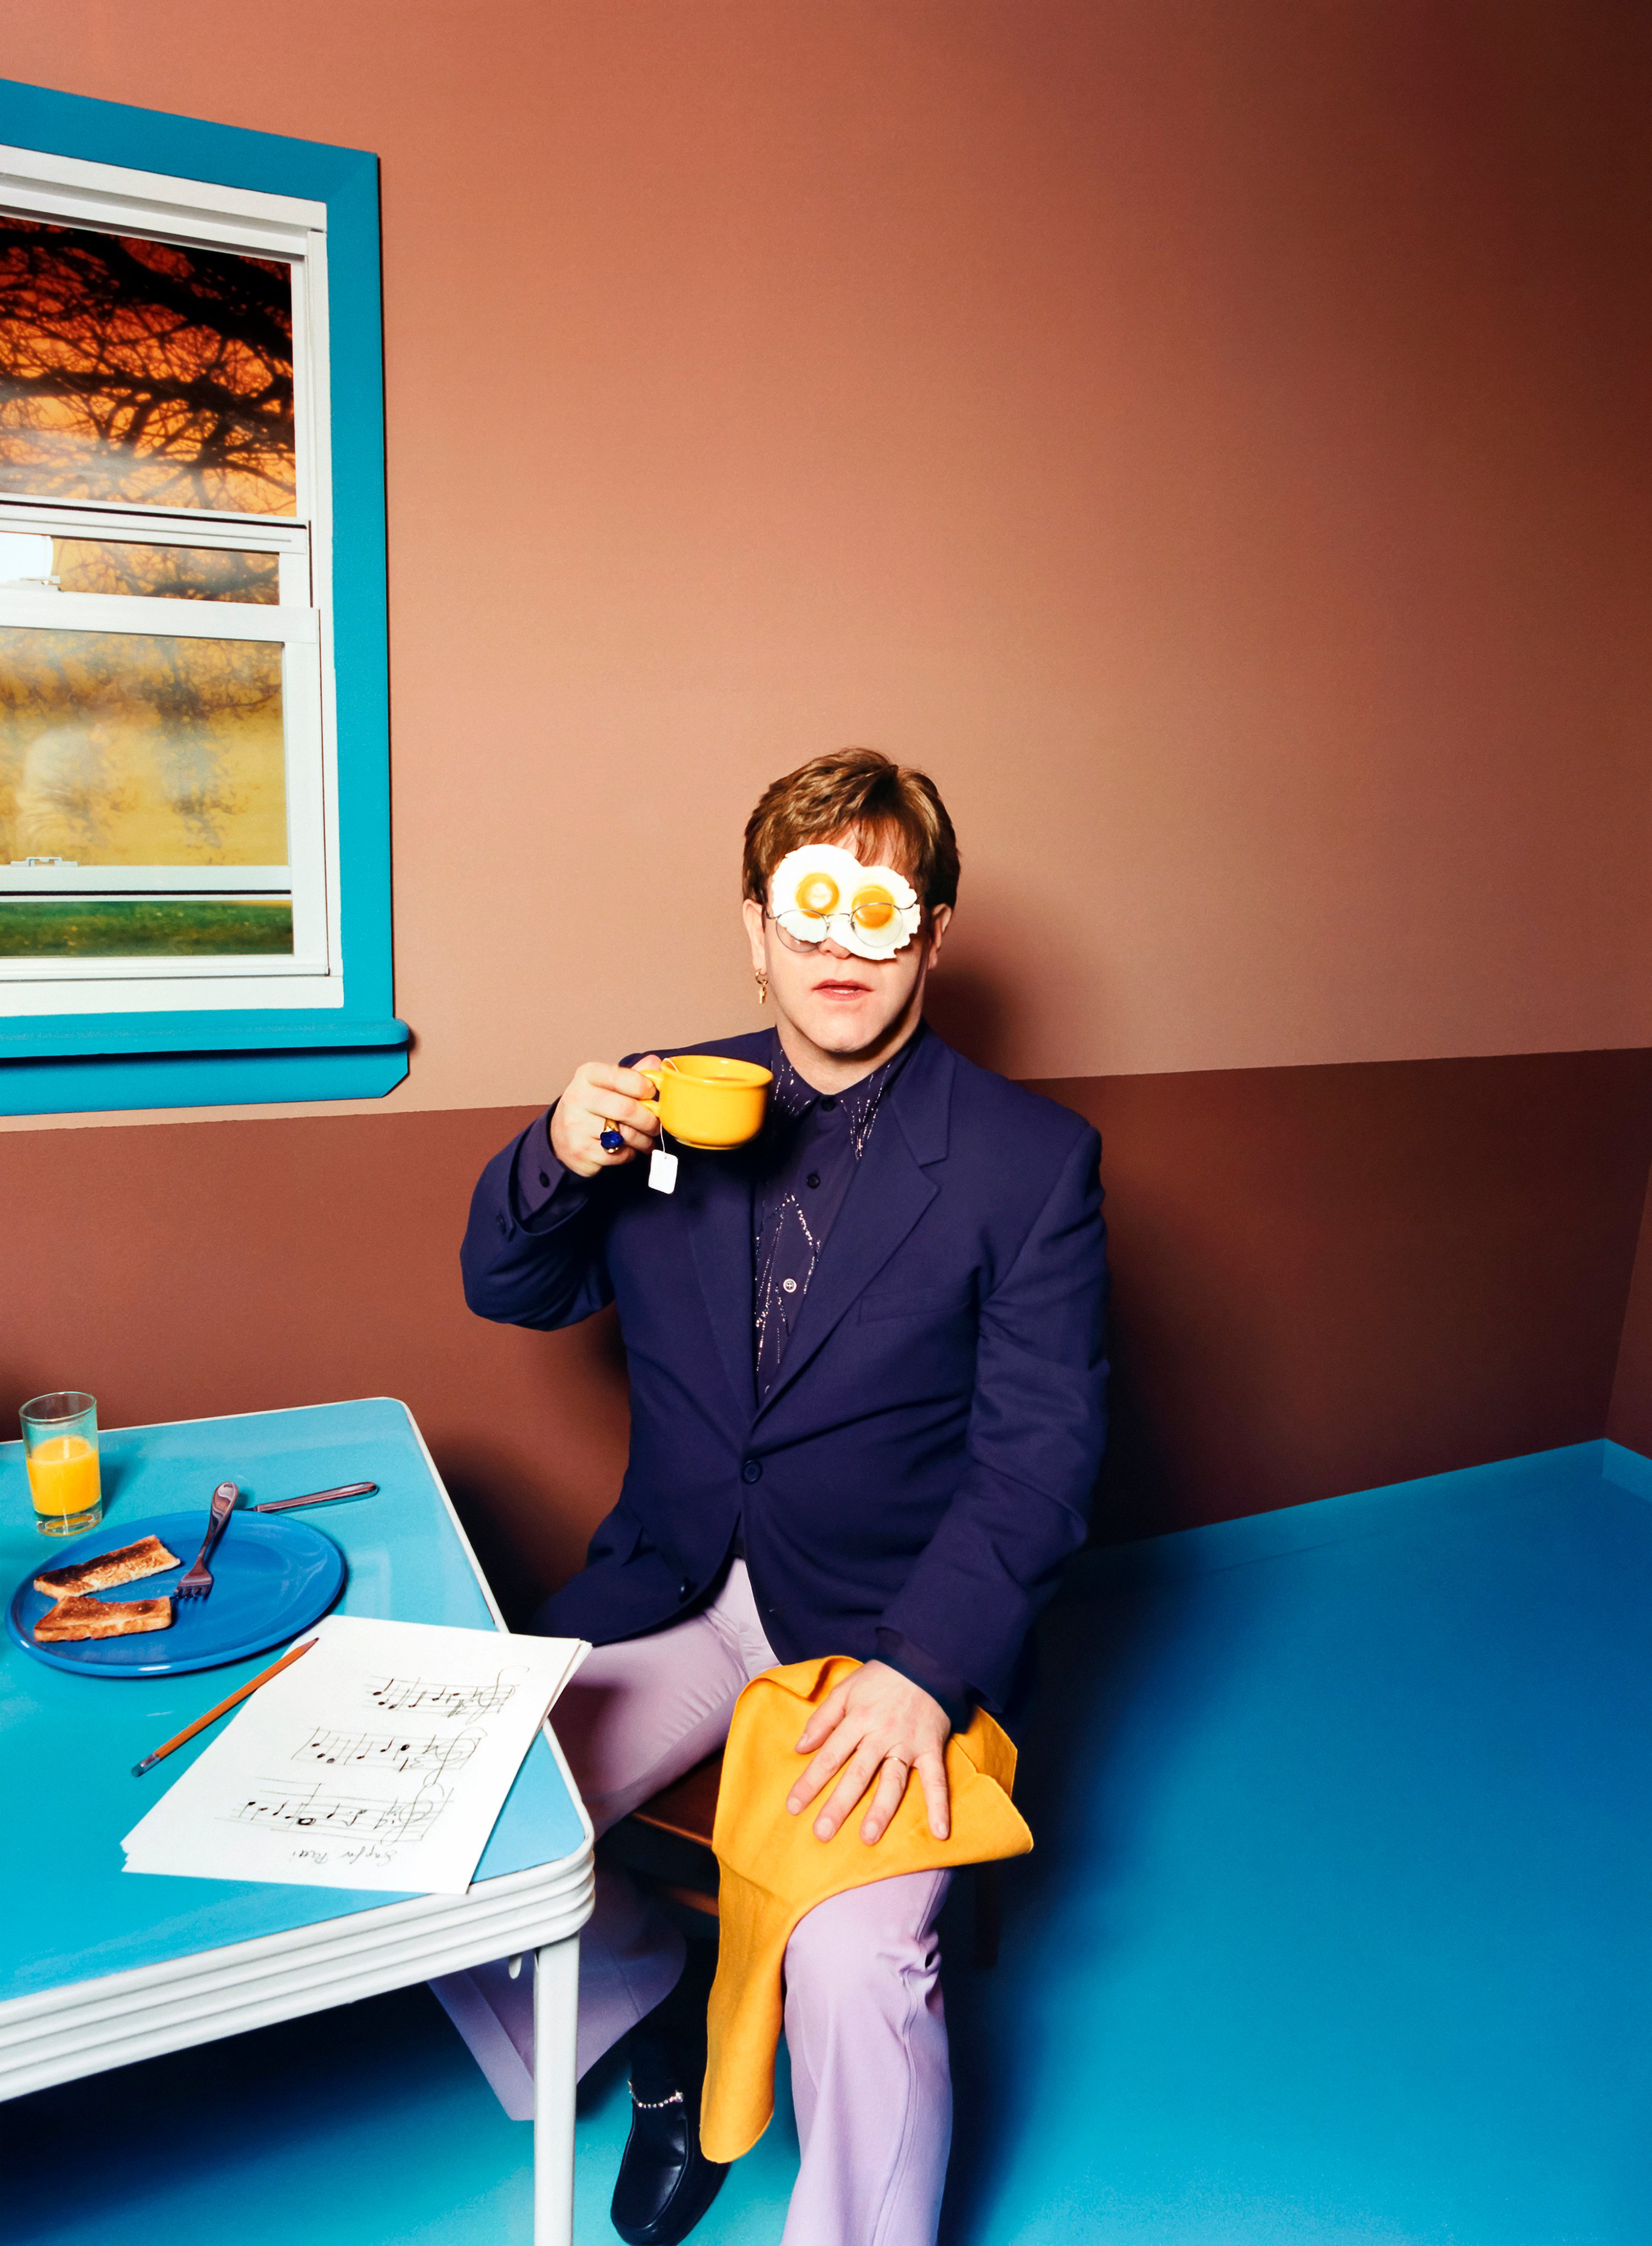 Elton John, Egg On His Face, New York, 1999, by David LaChapelle is among 300 photos from the collection of Elton John and David Furnish on display in an exhibition, Fragile Beauty, at London’s Victoria and Albert Museum until January. Photo: David LaChapelle/Victoria and Albert Museum 